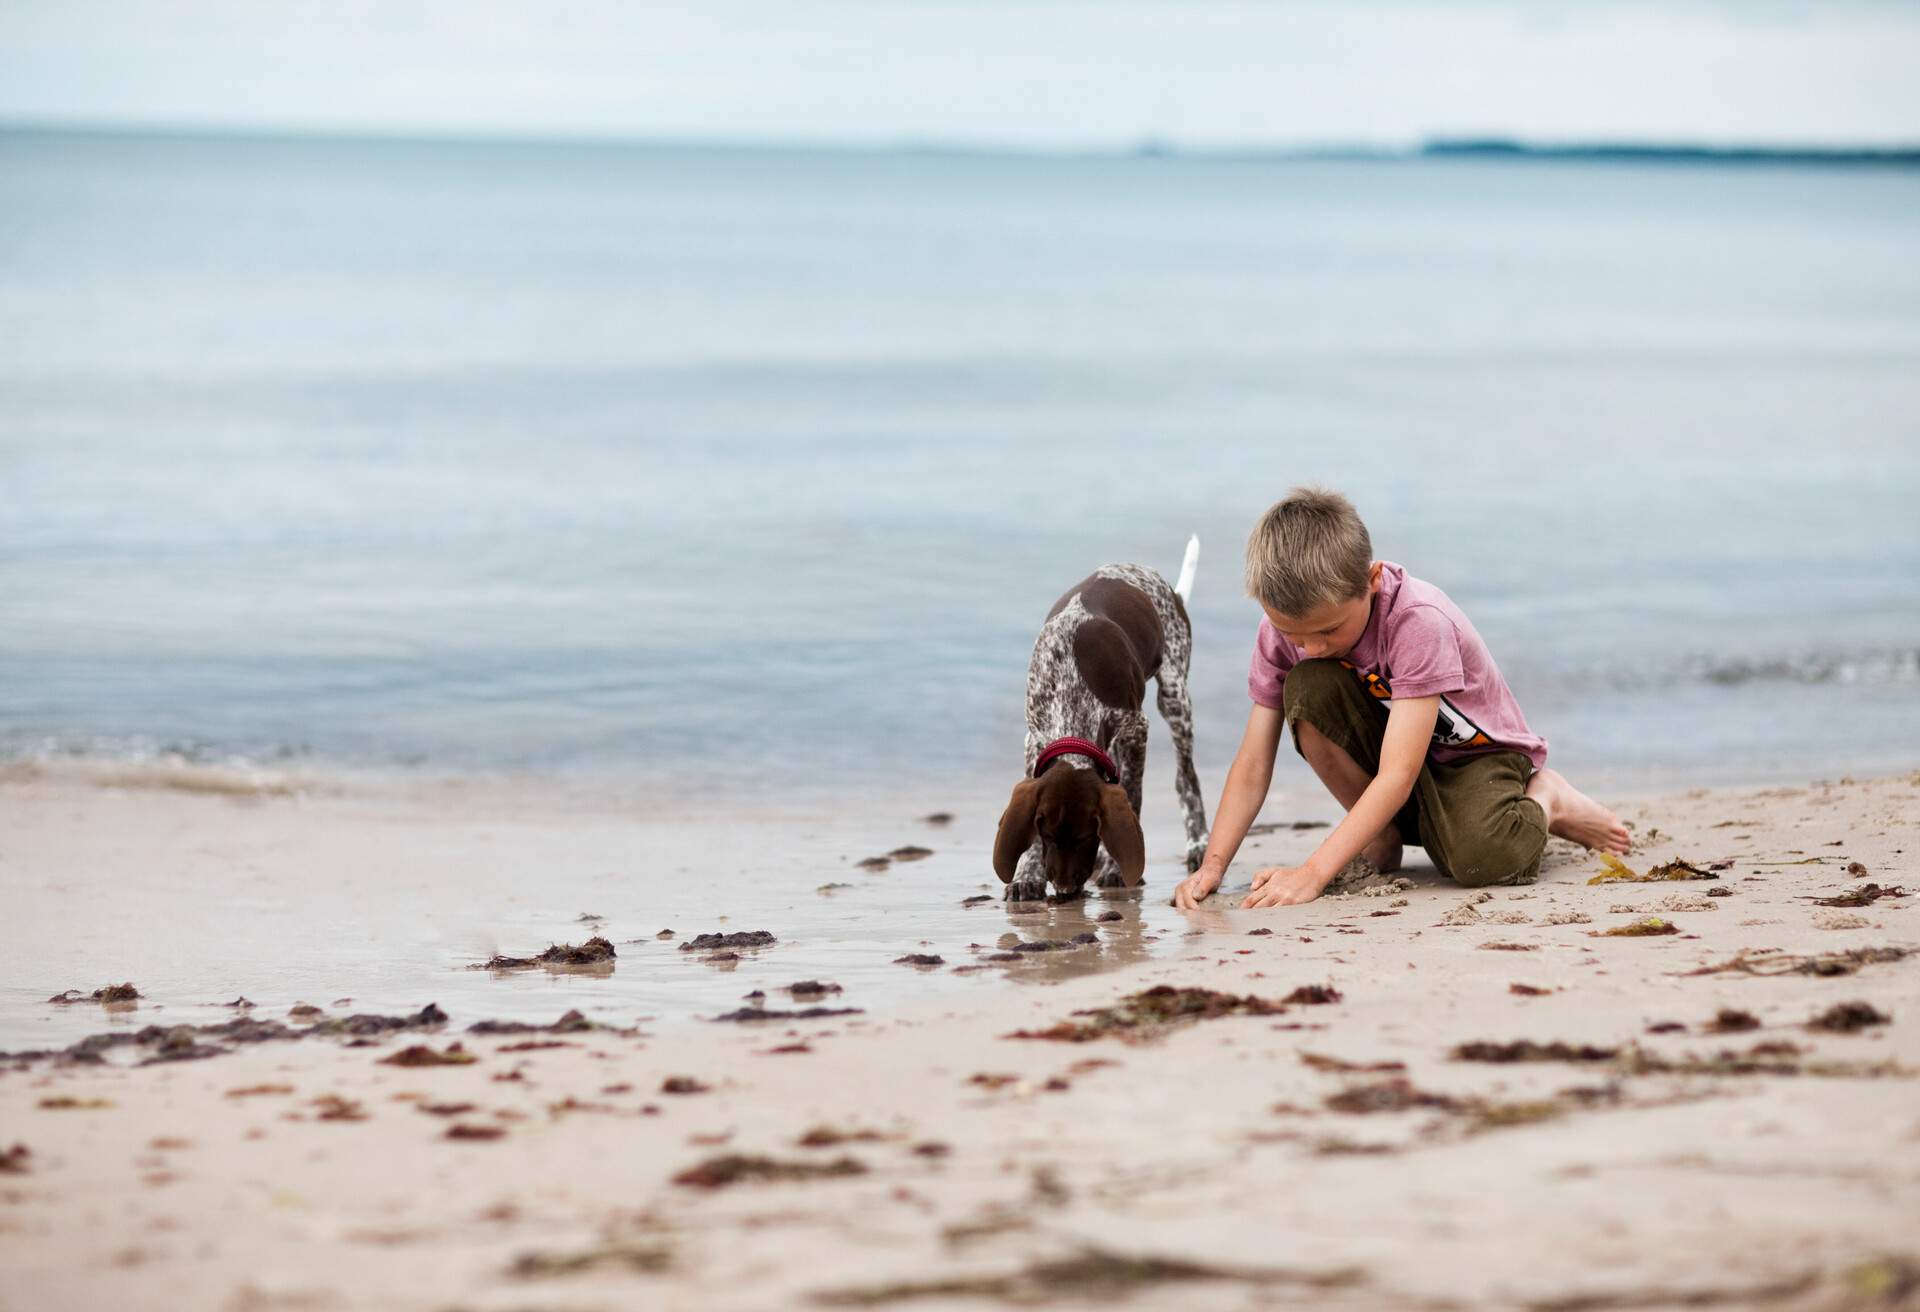 THEME_NATURE_PEOPLE_BEACH_BOY_DOG_SAND_GettyImages-119545934